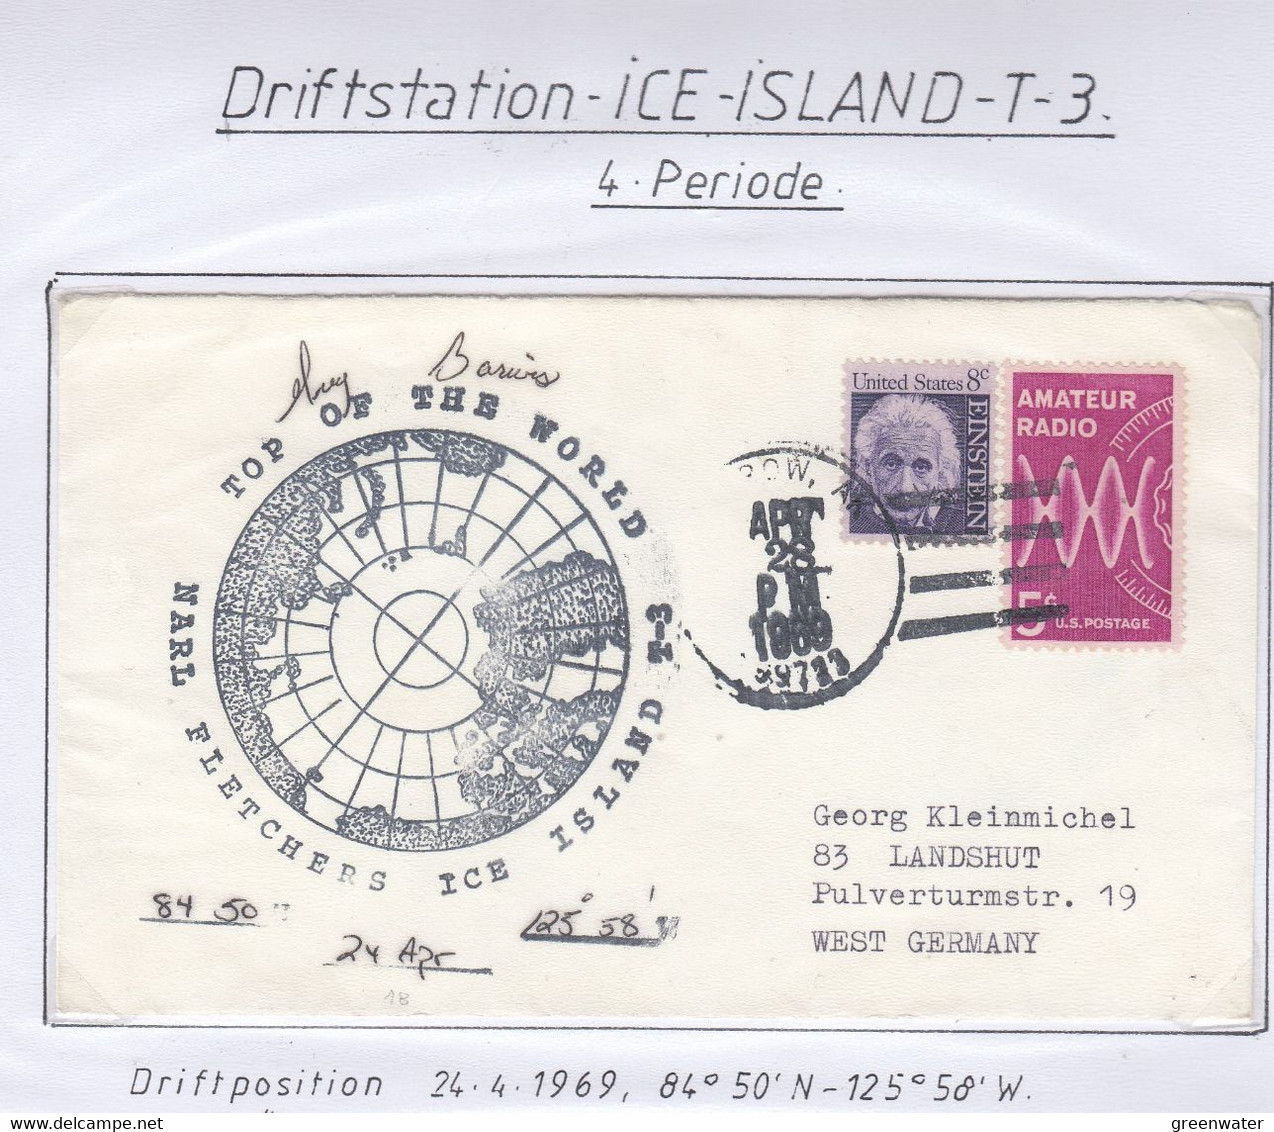 USA Driftstation ICE-ISLAND T-3 Cover  Ice Island T-3 Periode 4 Ca Apr 28 1969 Signature (DR132) - Stations Scientifiques & Stations Dérivantes Arctiques